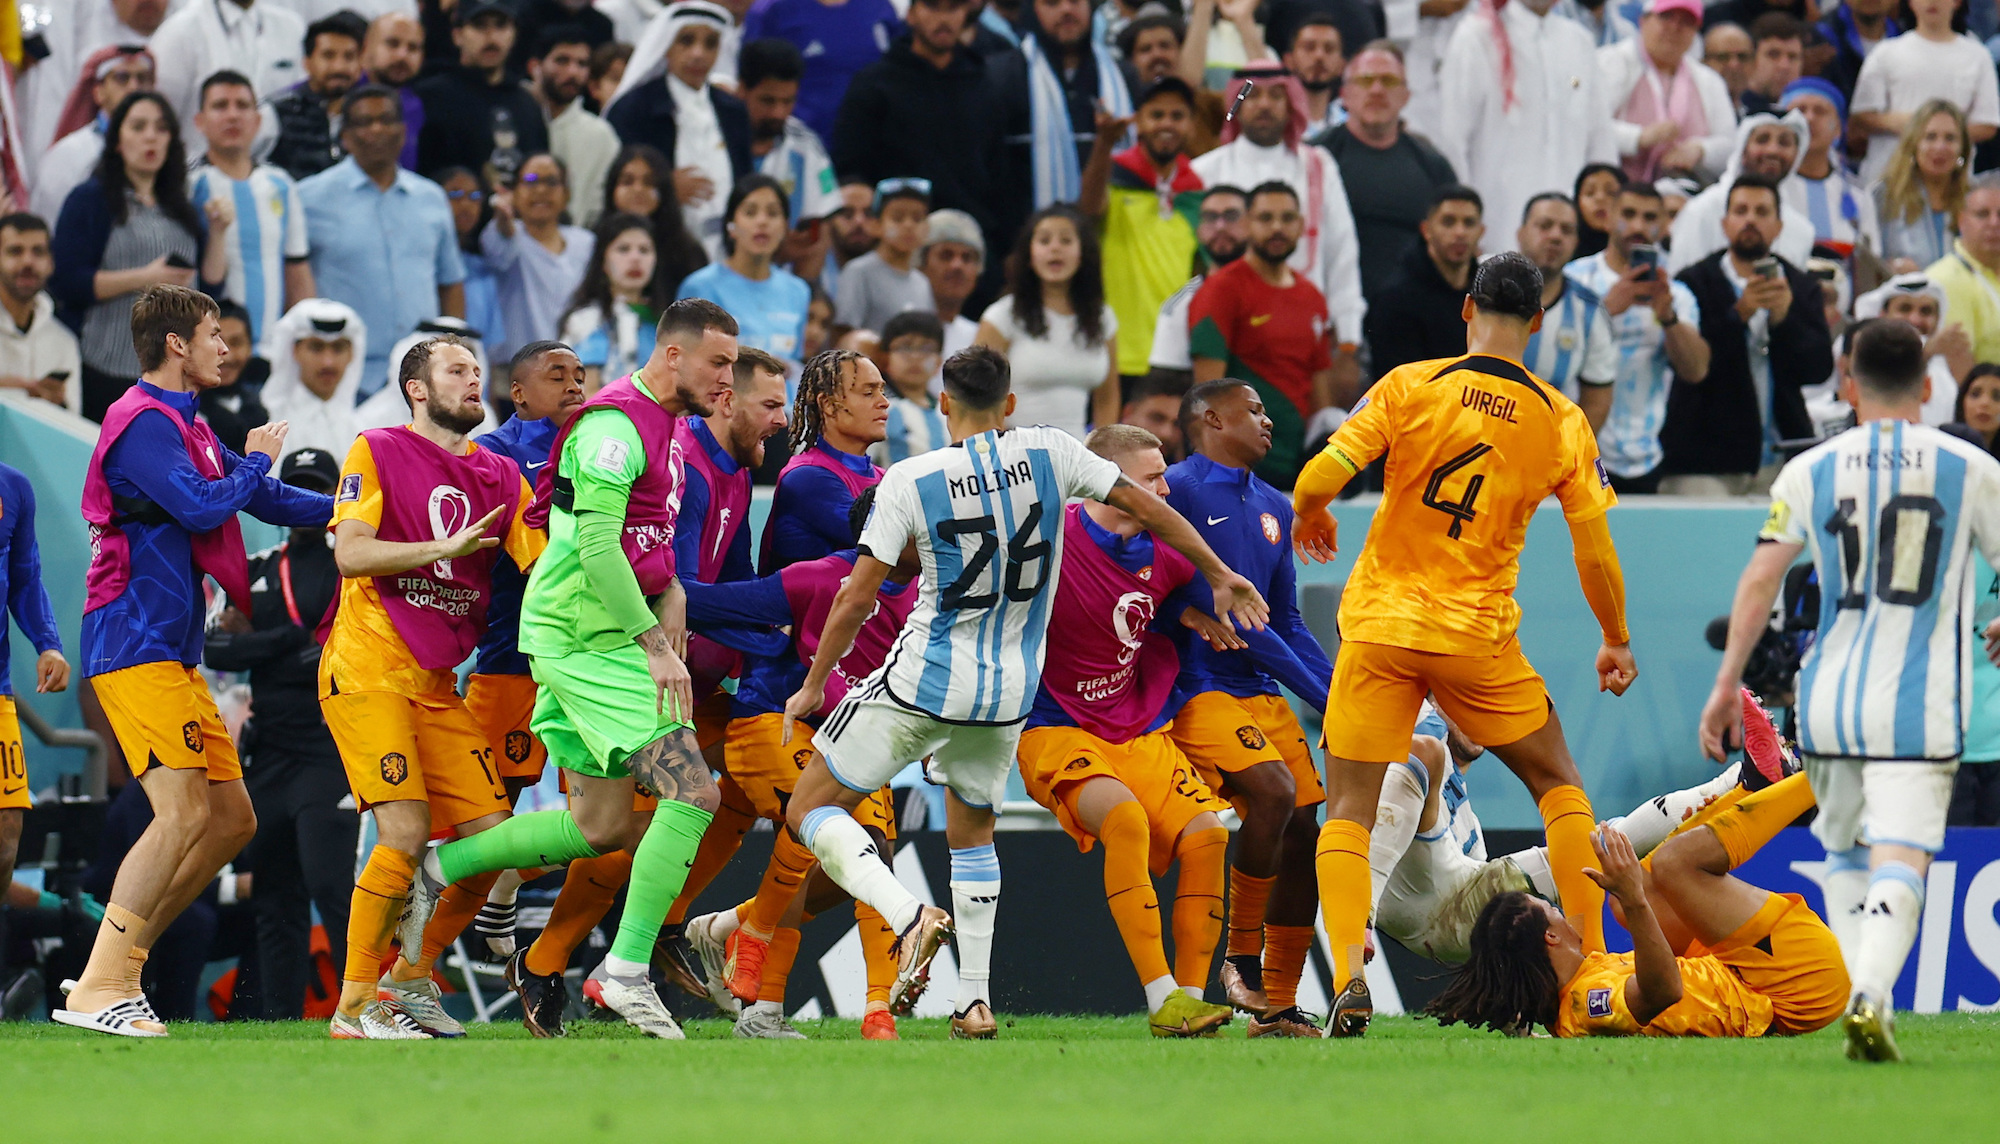 Players clash after an Argentine ball launched into the Dutch bench.